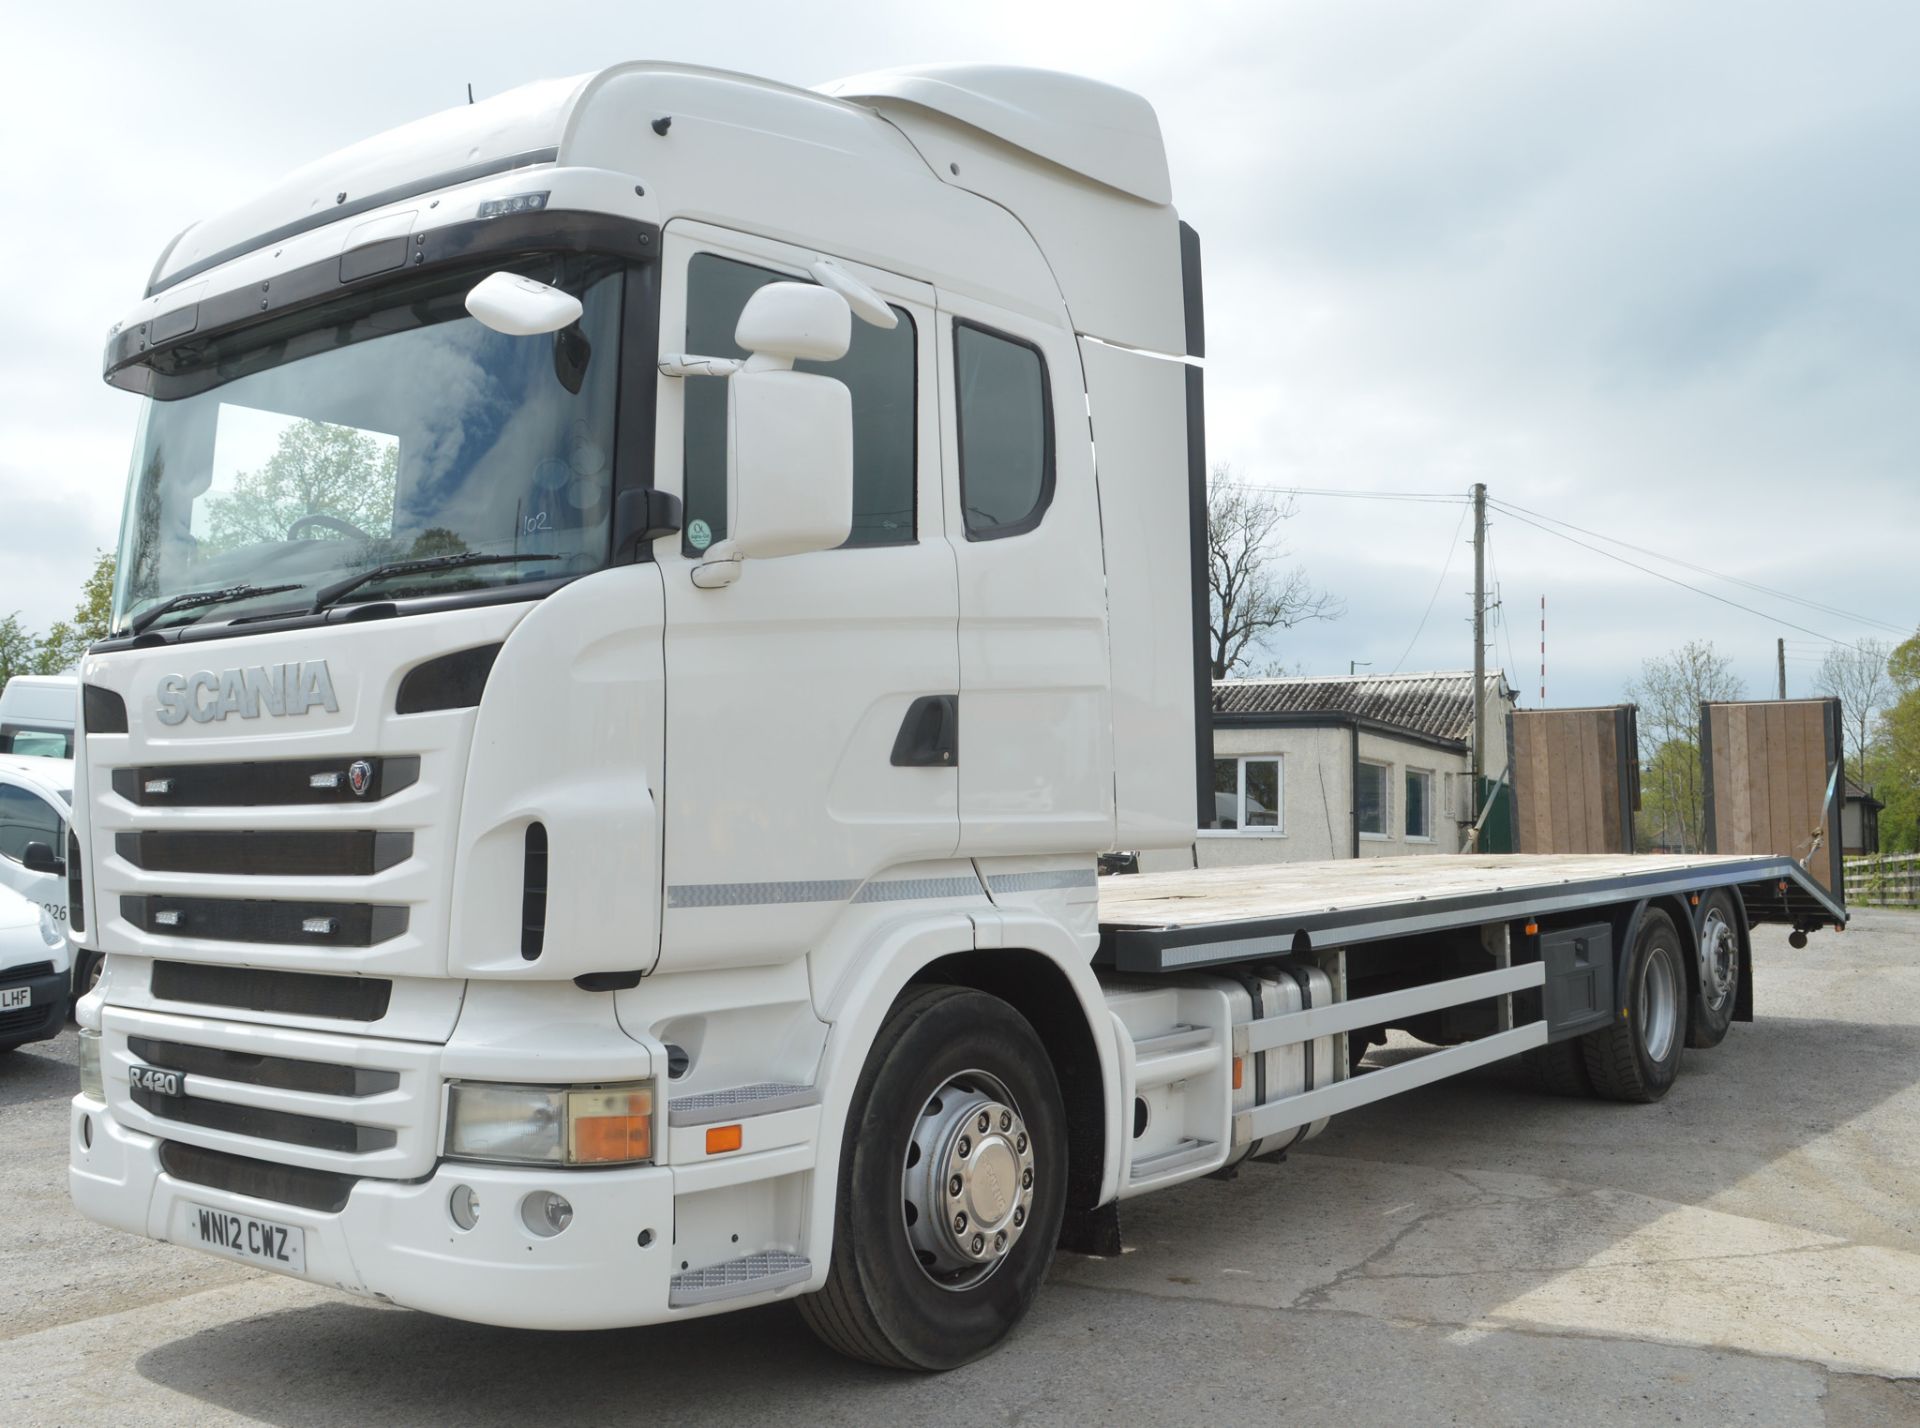 Scania R420 High Line Euro 5 6x2 30 foot beaver tail plant lorry  Registration number: WN12 CWZ